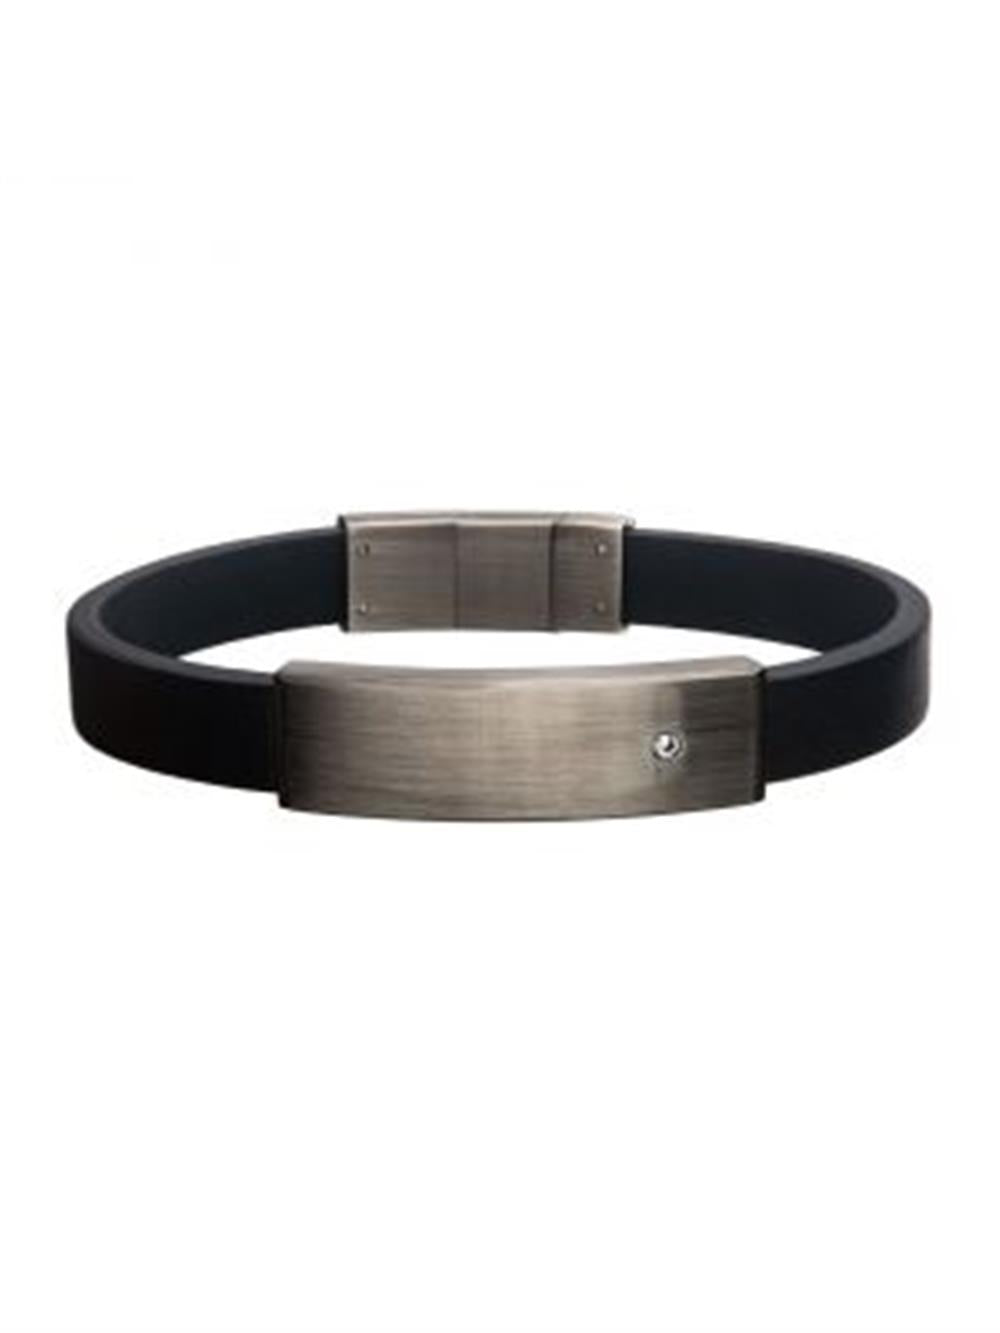 Black Leather with 2mm Clear CZ in Engrave Steel ID Bracelet | INOX